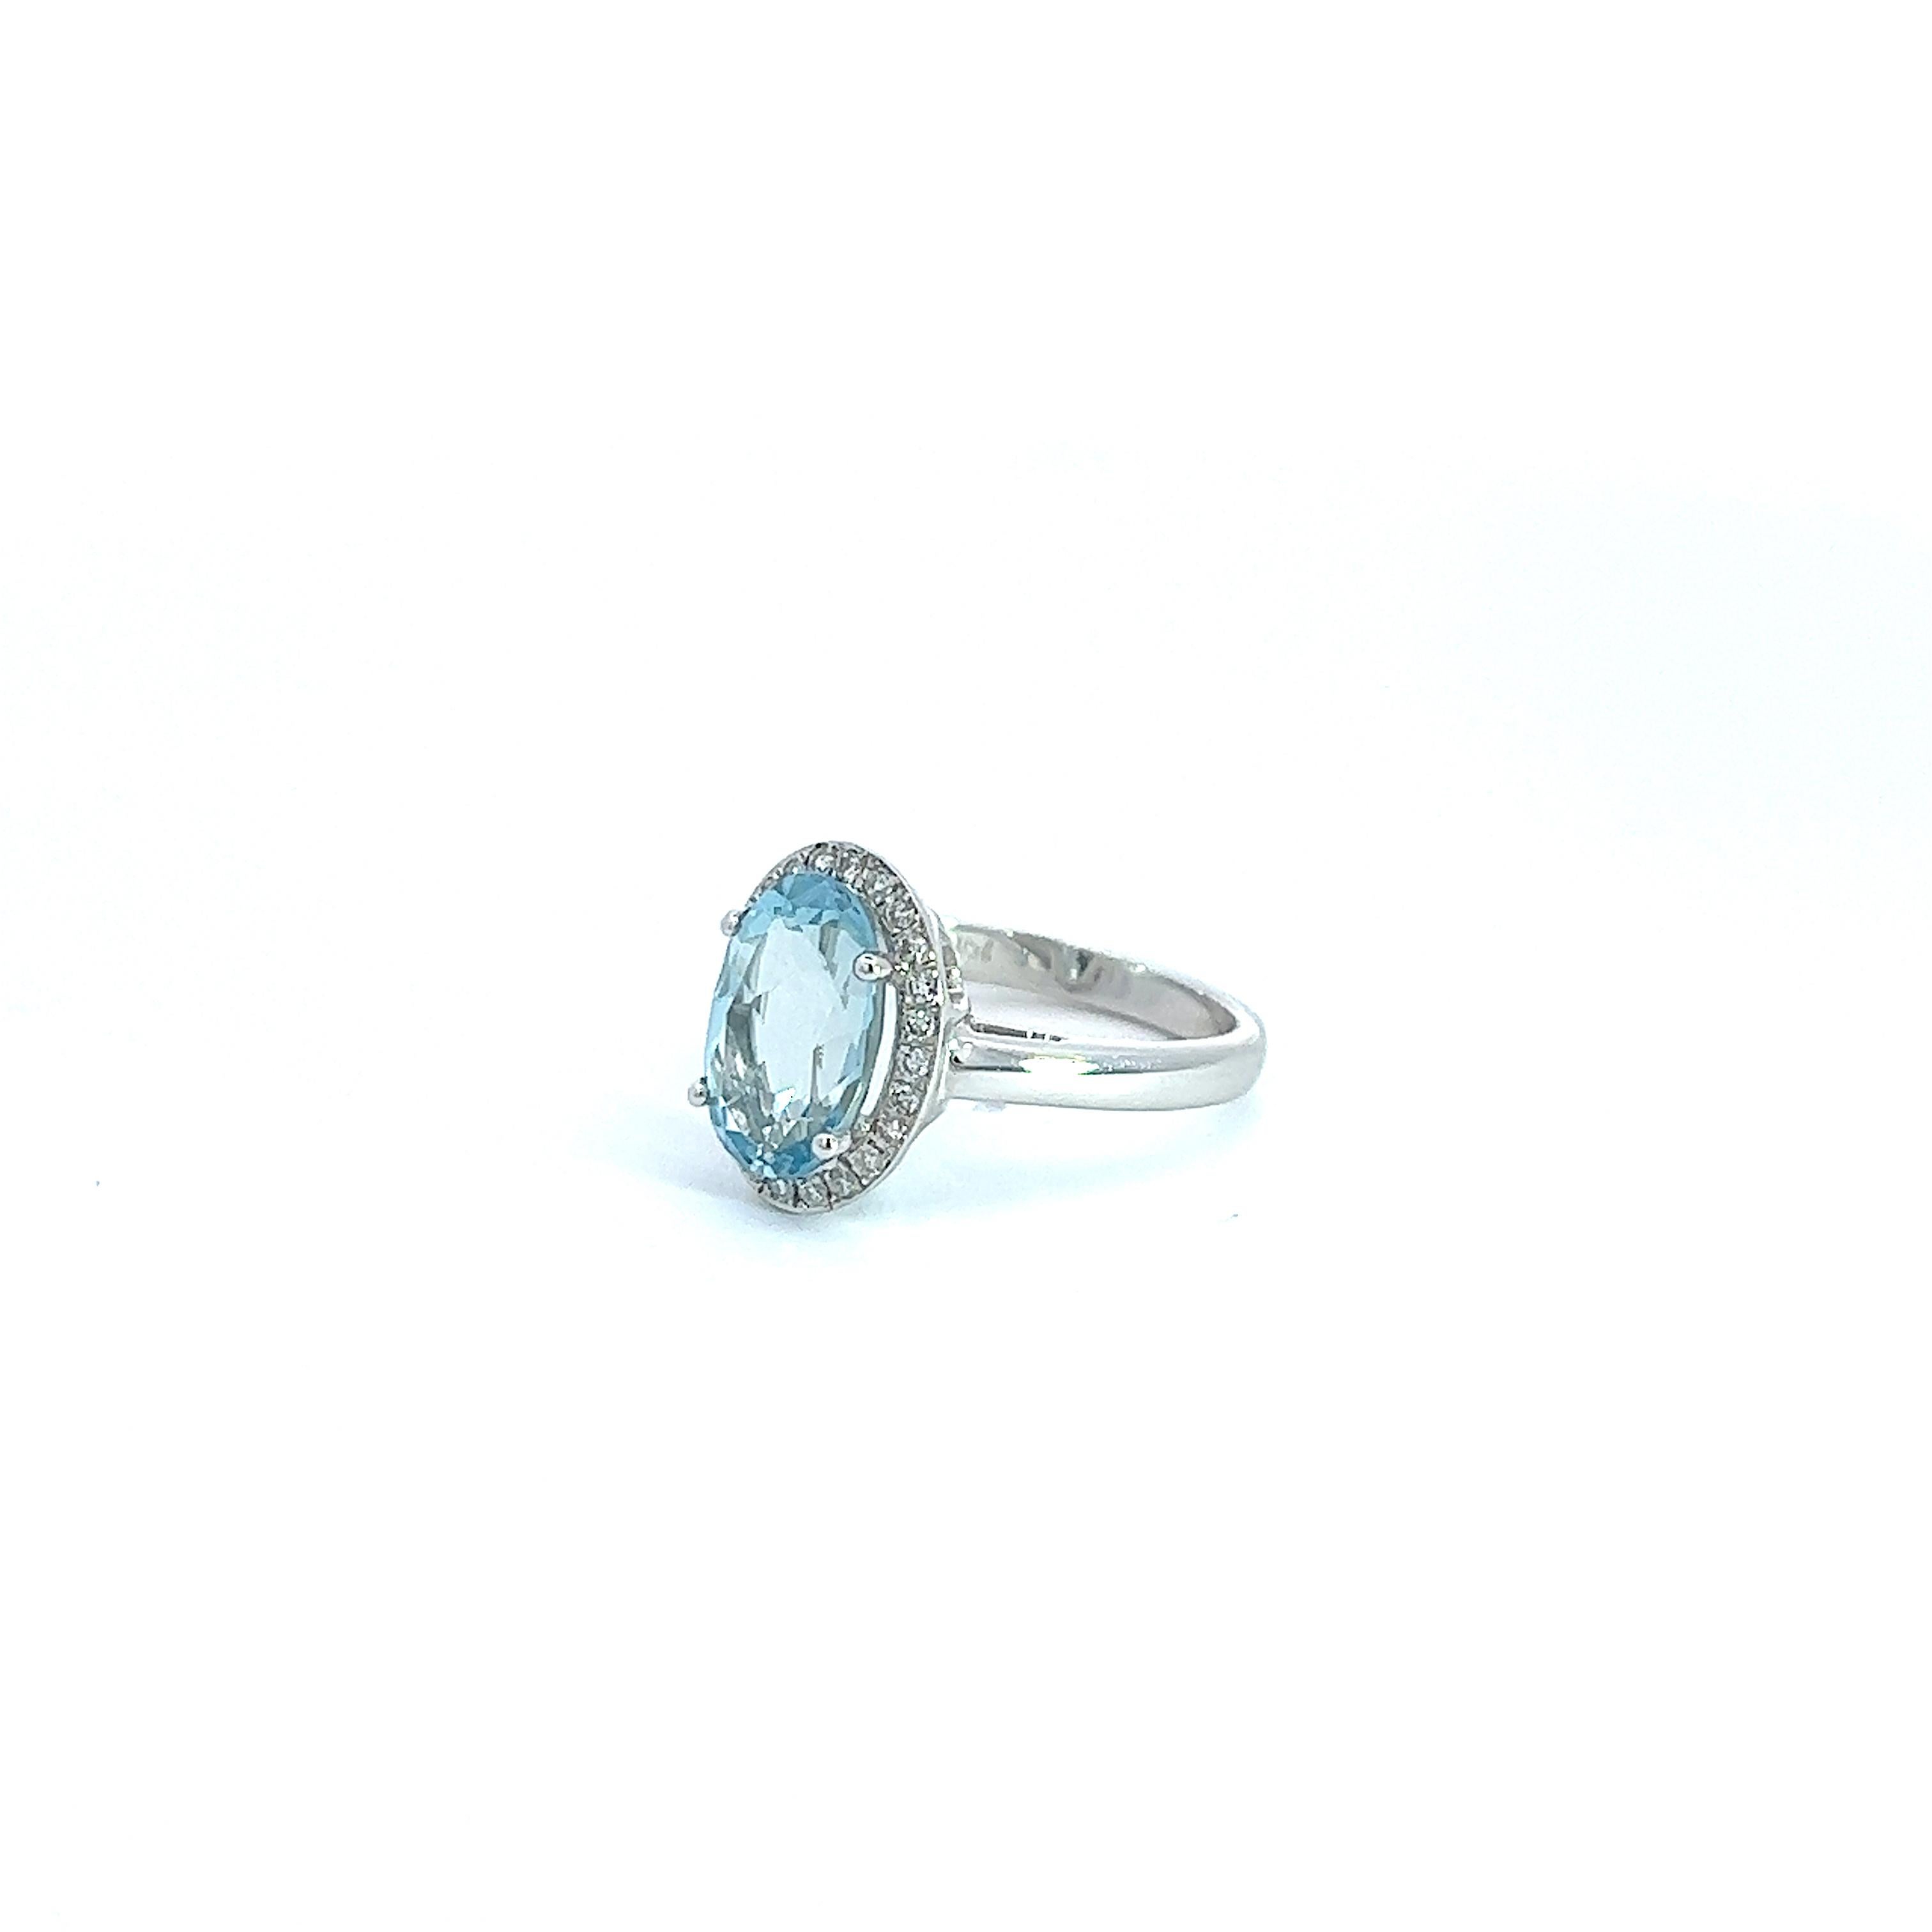 Georgios Collections 18 Karat White Gold Aquamarine Ring with Diamond Bezel For Sale 5